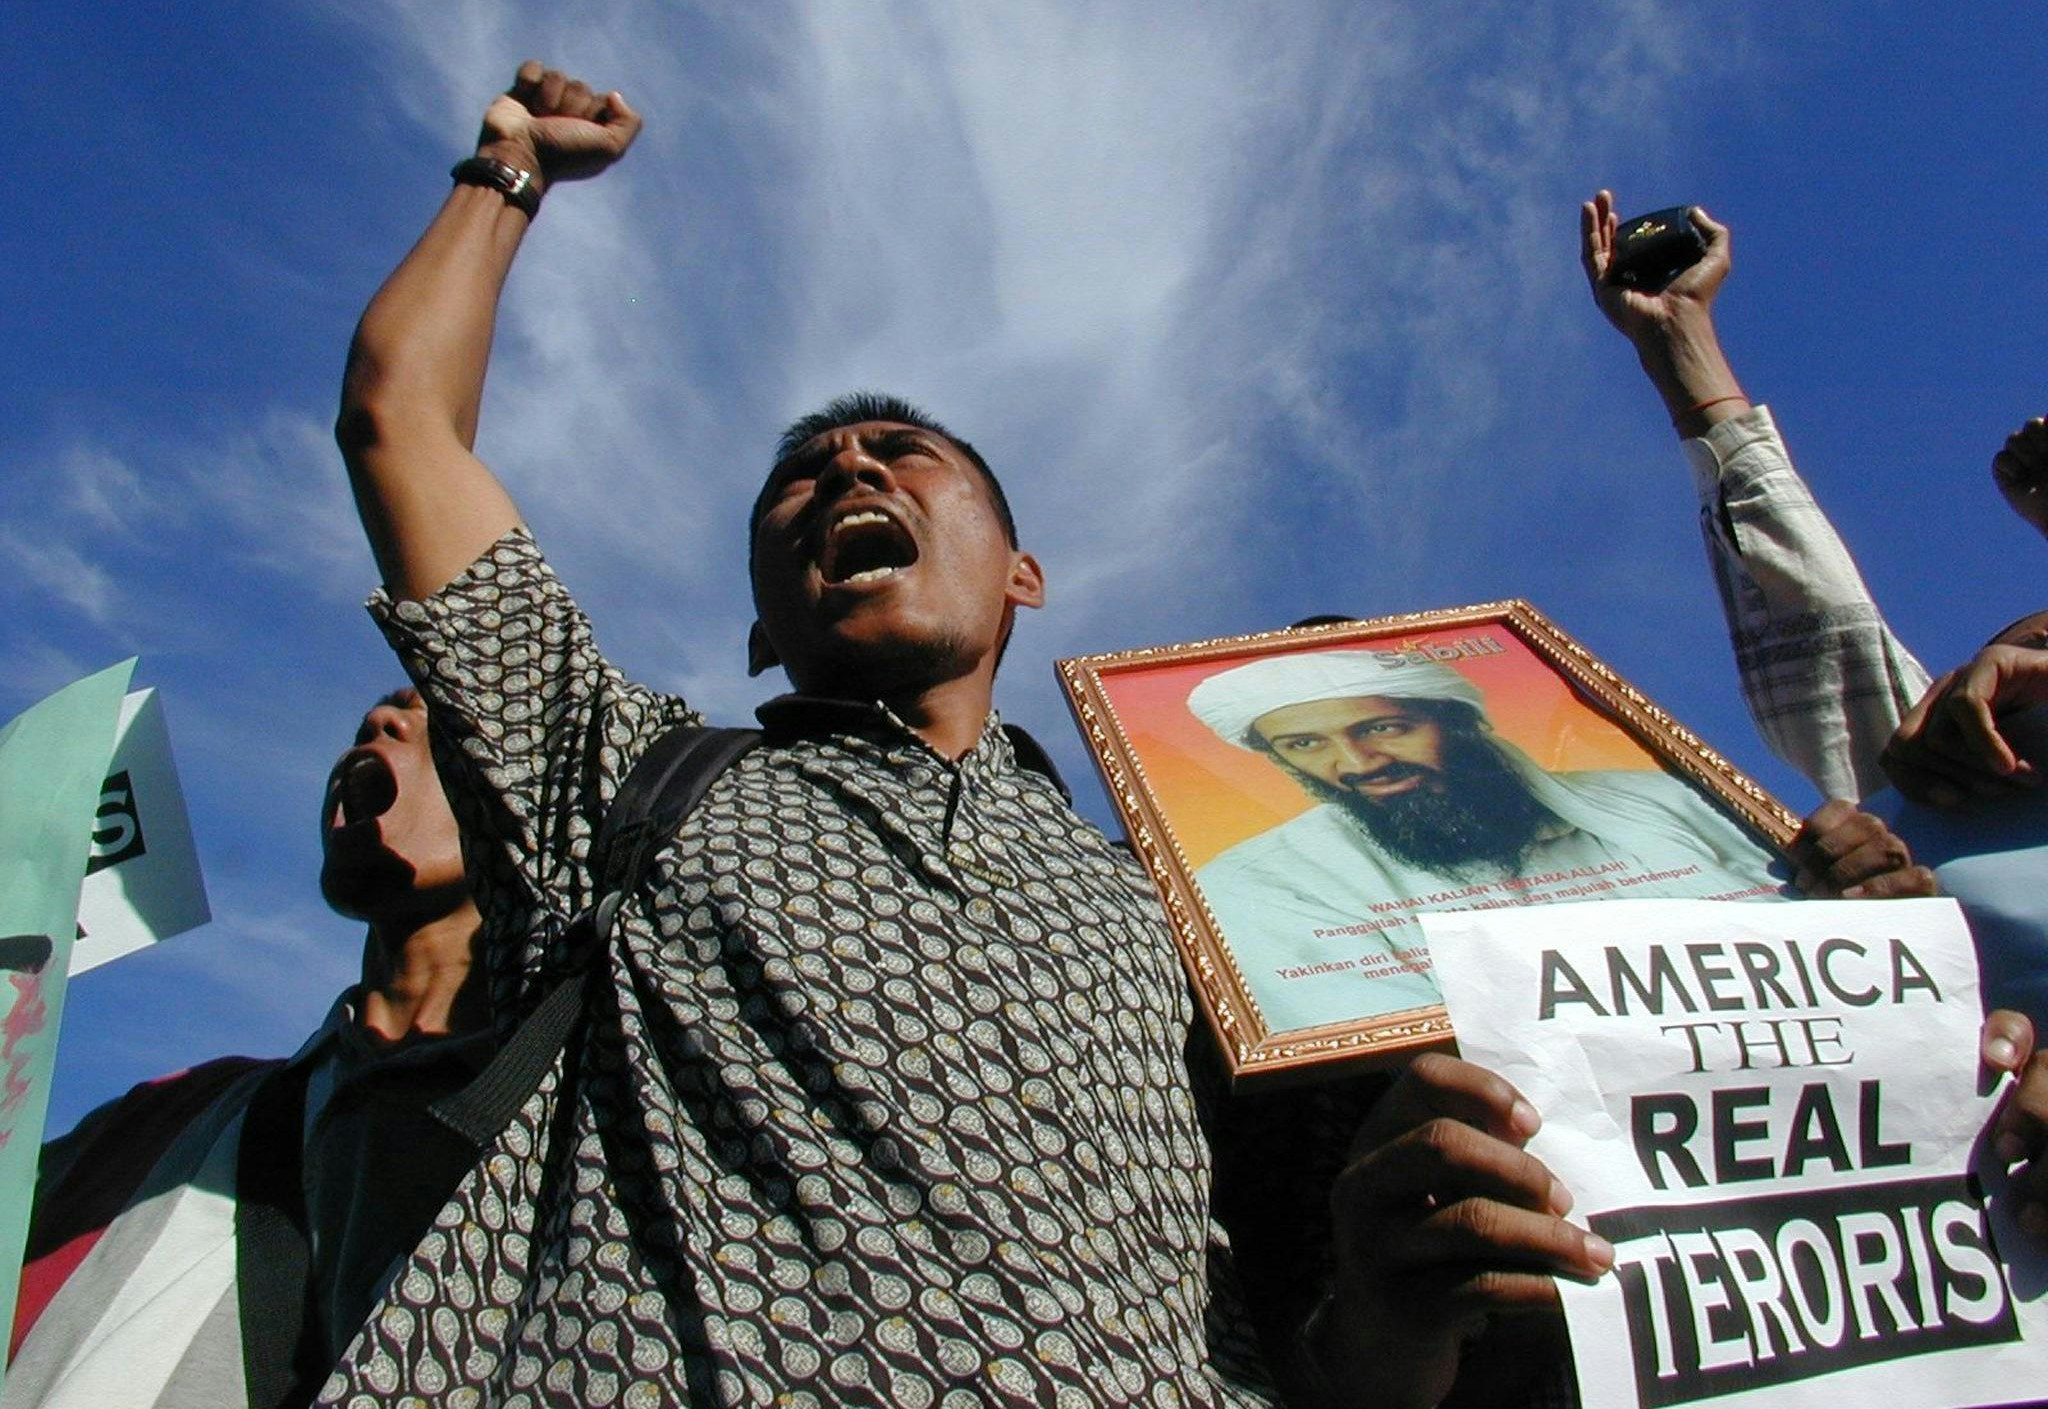 BANDA ACEH, INDONESIA:  A Muslim protestor holding a portrait of Saudi-dissident Osama bin Laden shout "Allah Akbar" during a protest in front of Baiturrahman mosque, Banda Aceh, 10 October 2001. The demonstrators are protesting against the US-led military strikes against Afghanistan.       AFP PHOTO (Photo credit should read AFP/Getty Images)